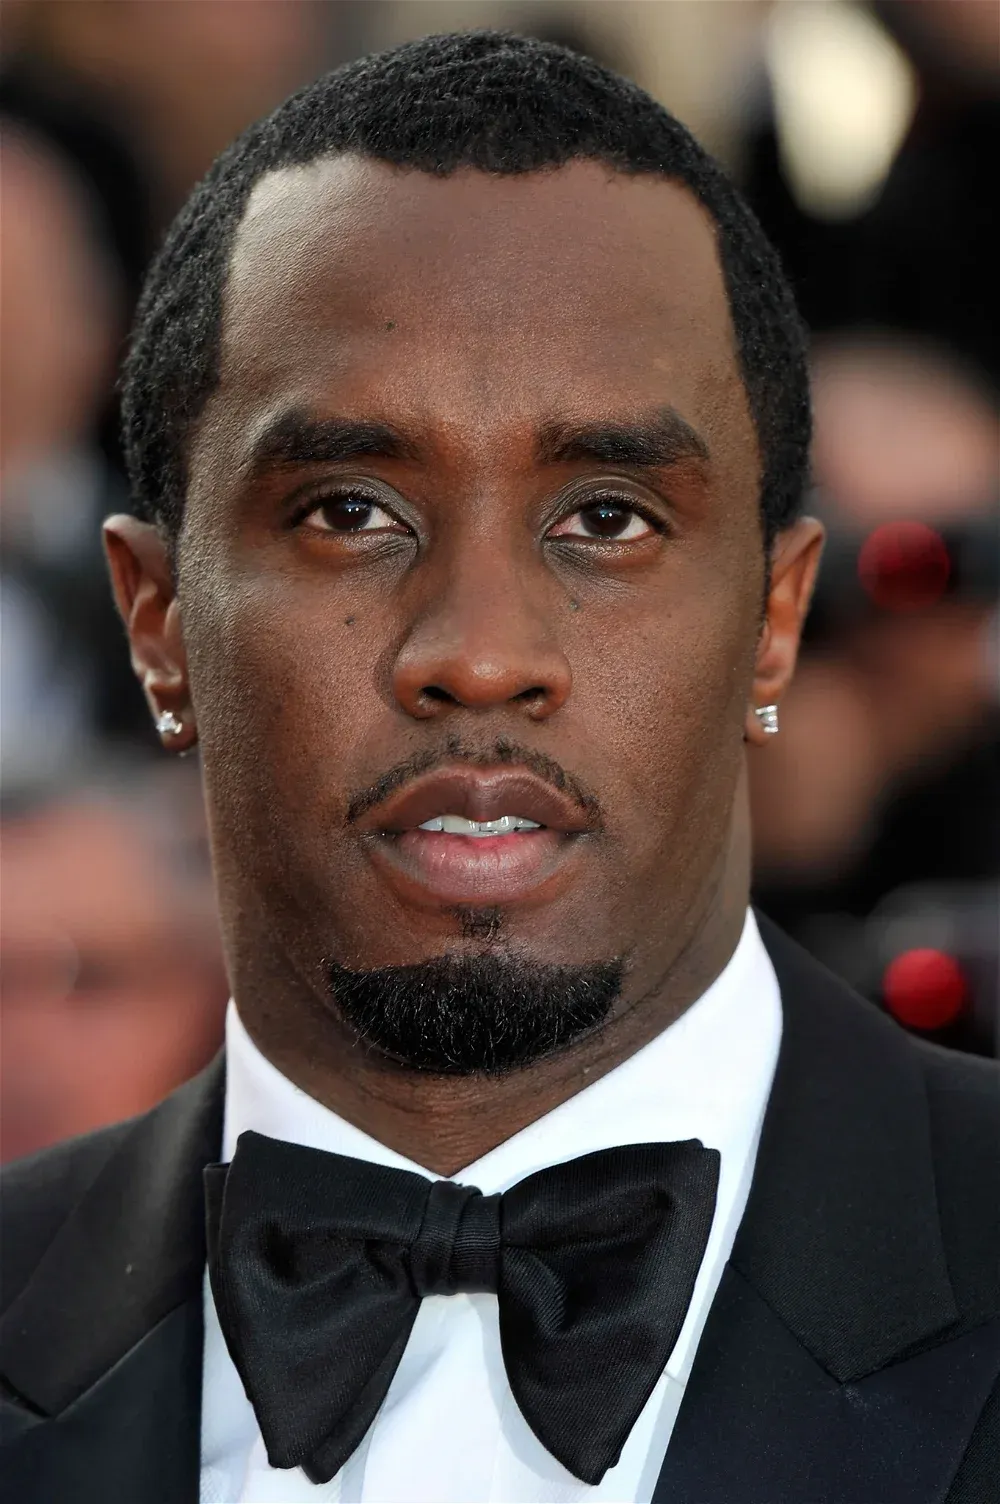 Avatar of P Diddy